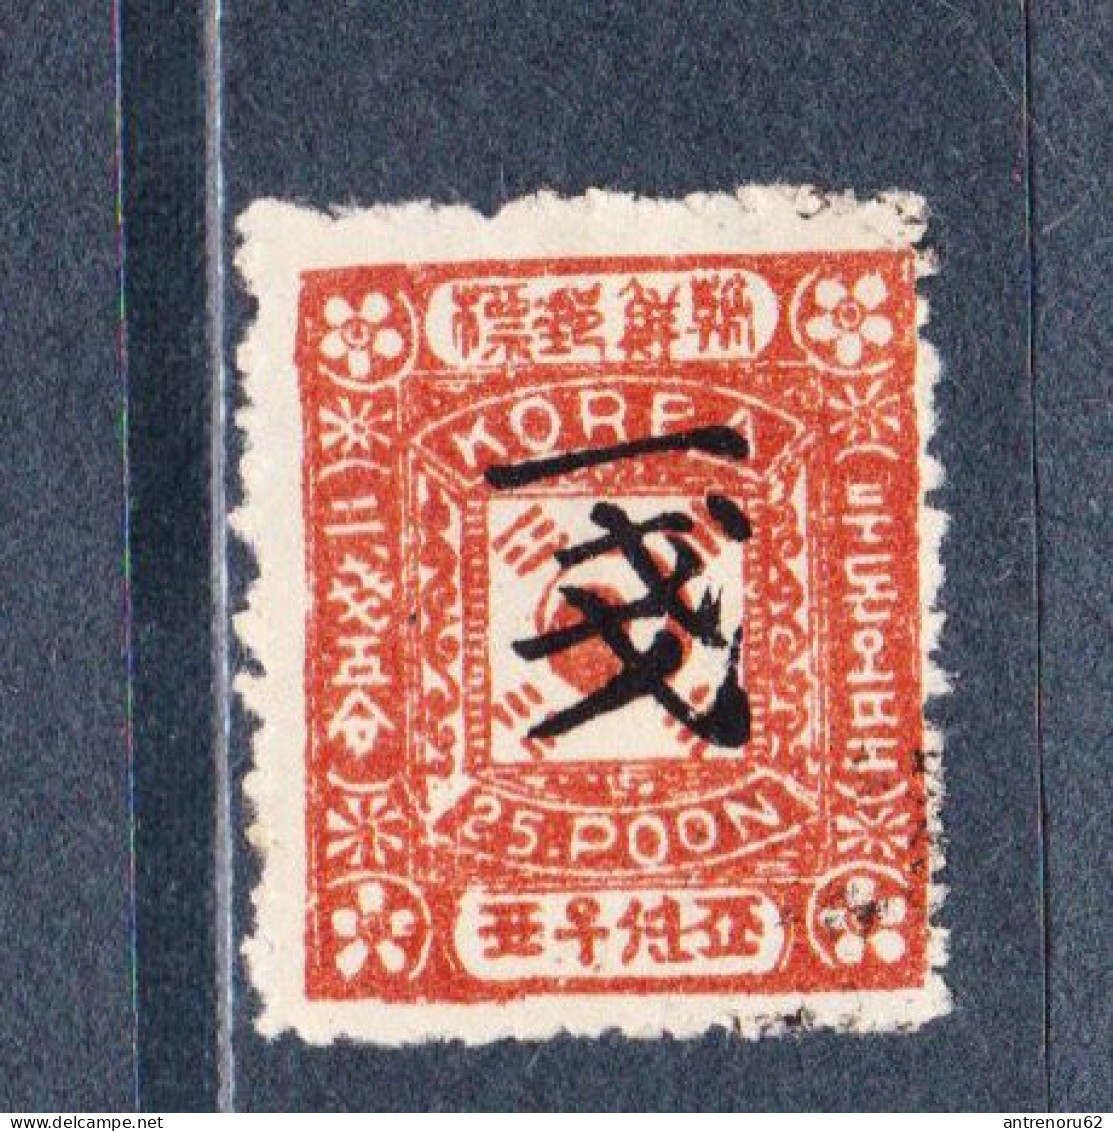 STAMPS-KOREA-1901-USED-SEE-SCAN-I DON'T KNOW IF IT IS ORIGINAL - Korea (...-1945)